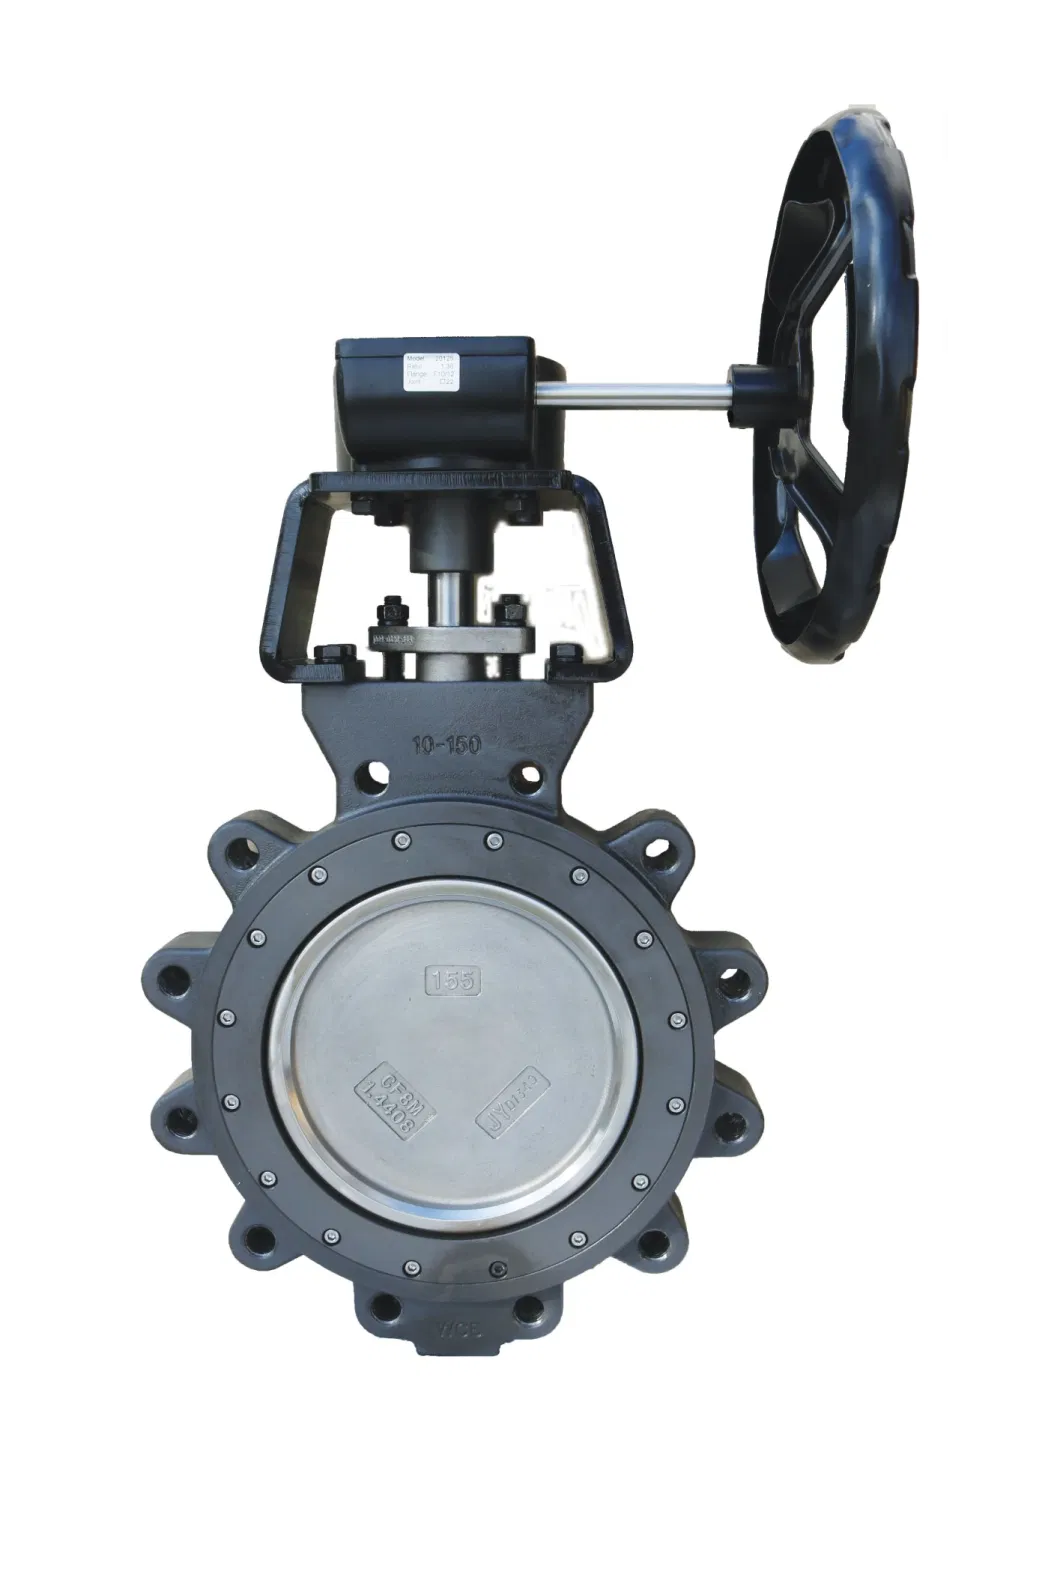 Wcb Body Gear Operated Butterfly Valve